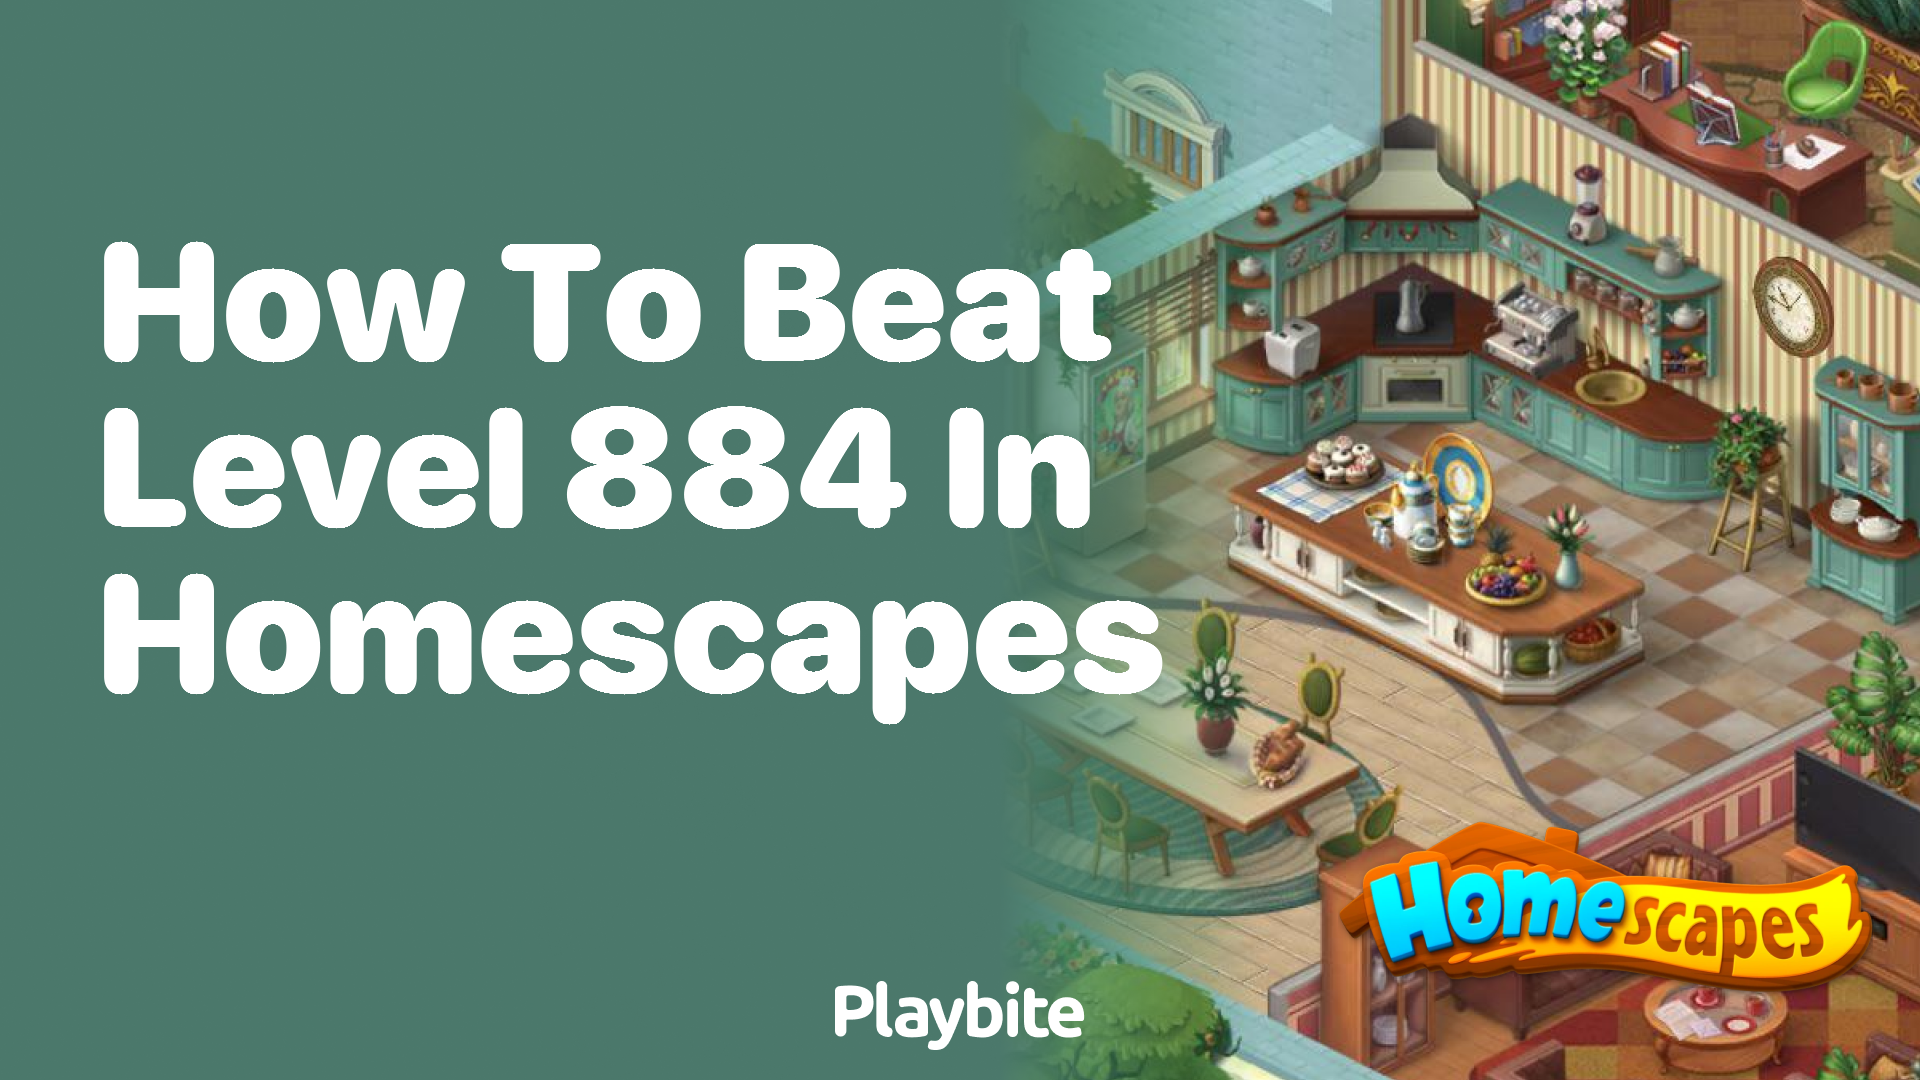 How to beat Level 884 in Homescapes?